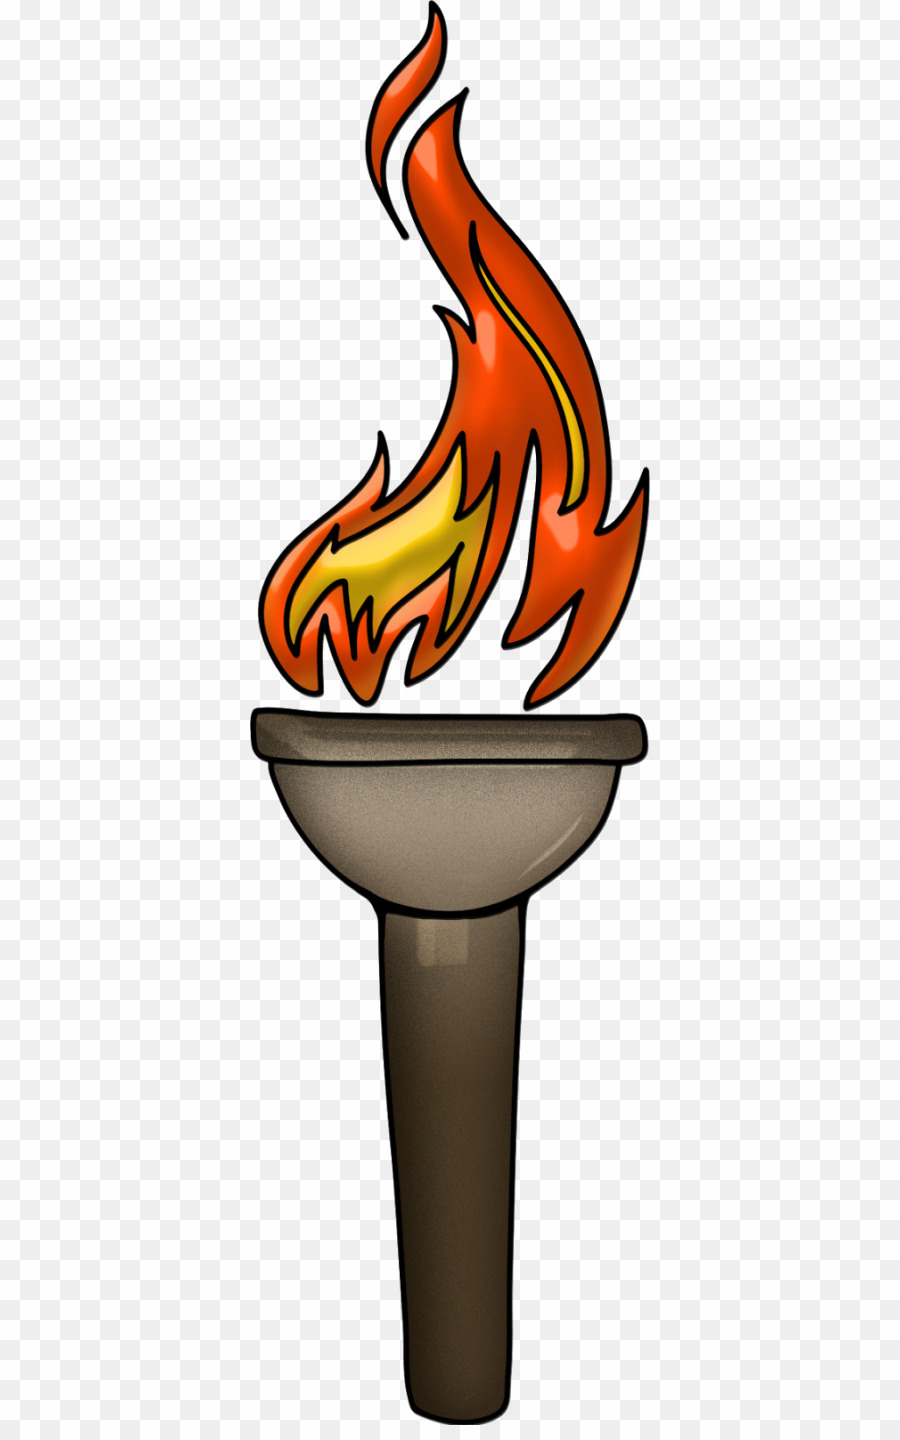 Torch PNG Torch Clipart download